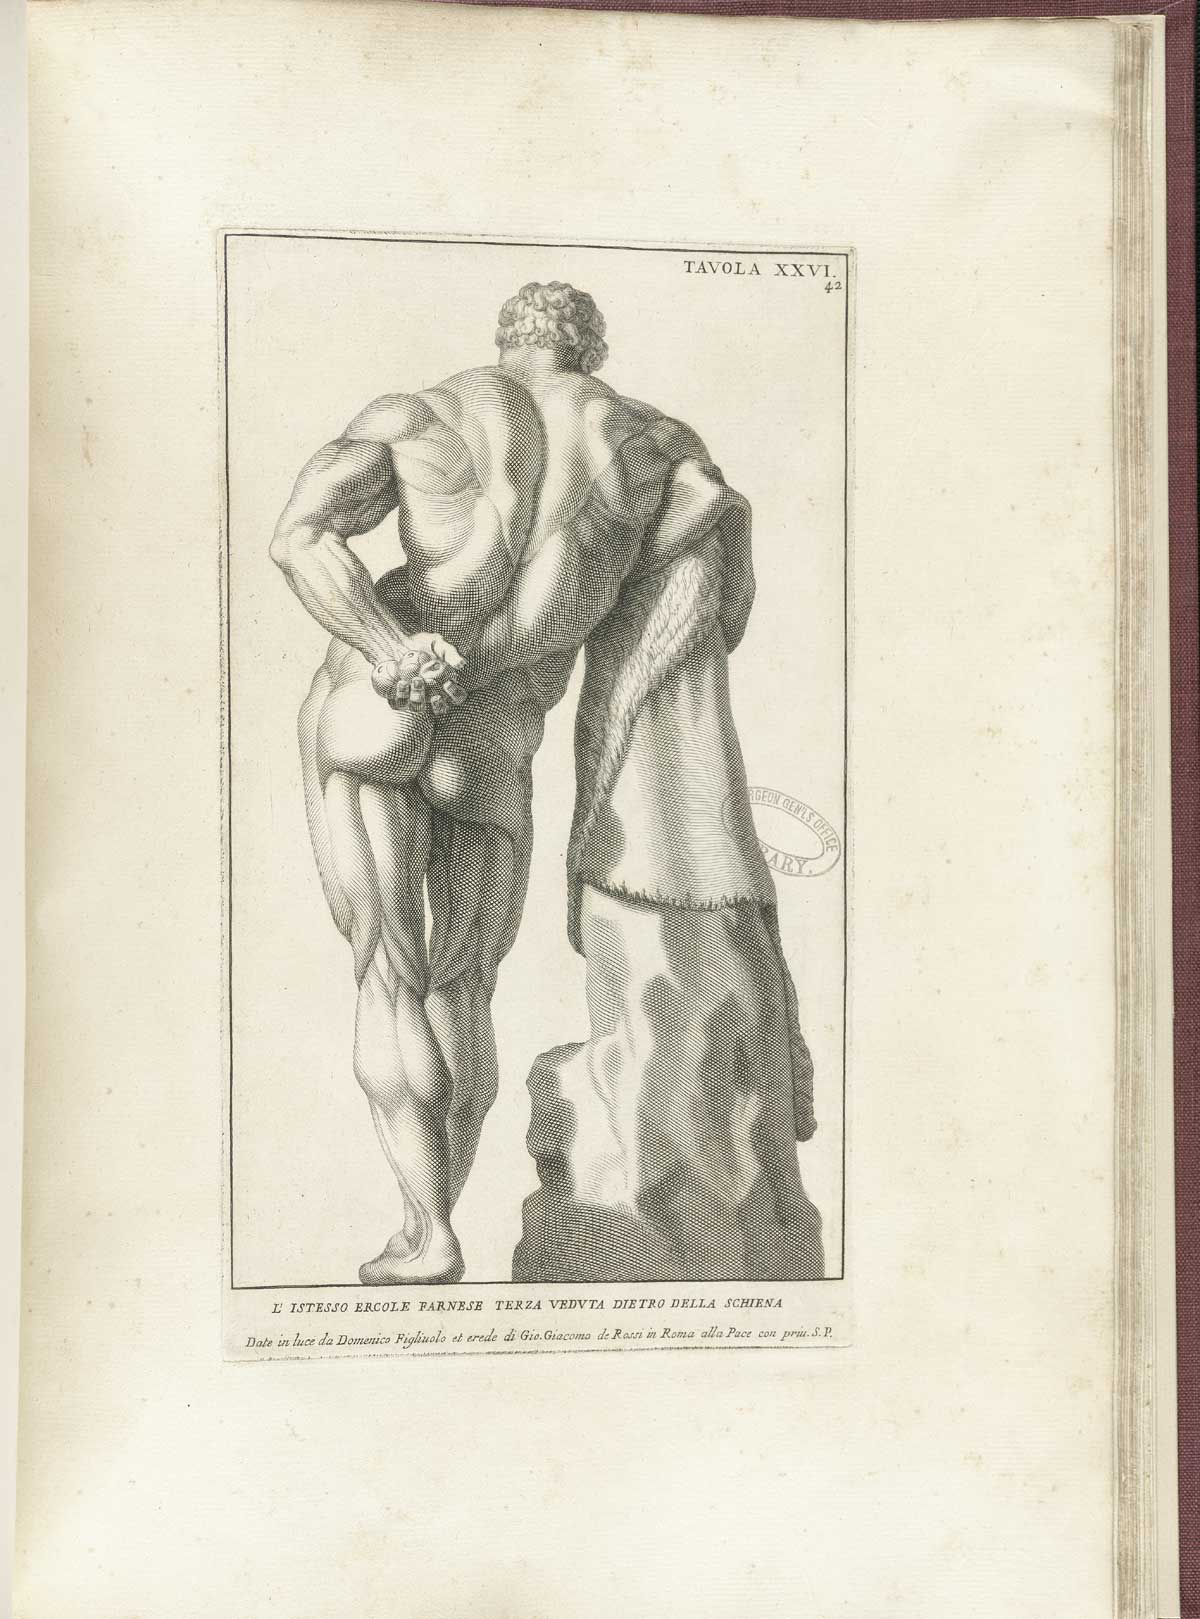 Engraving of the statue of Laocoon without his sons or the large snake which ate them; the nude facing seated figure has his left arm raised in struggle clenched in a fist as his right arm pushes down at his side, also with a clenched fist; his face faces the viewer with a look of struggle and agony; from Bernardino Genga’s Anatomia per uso et intelligenza del disegno, NLM Call no.: WZ 250 G329an 1691.